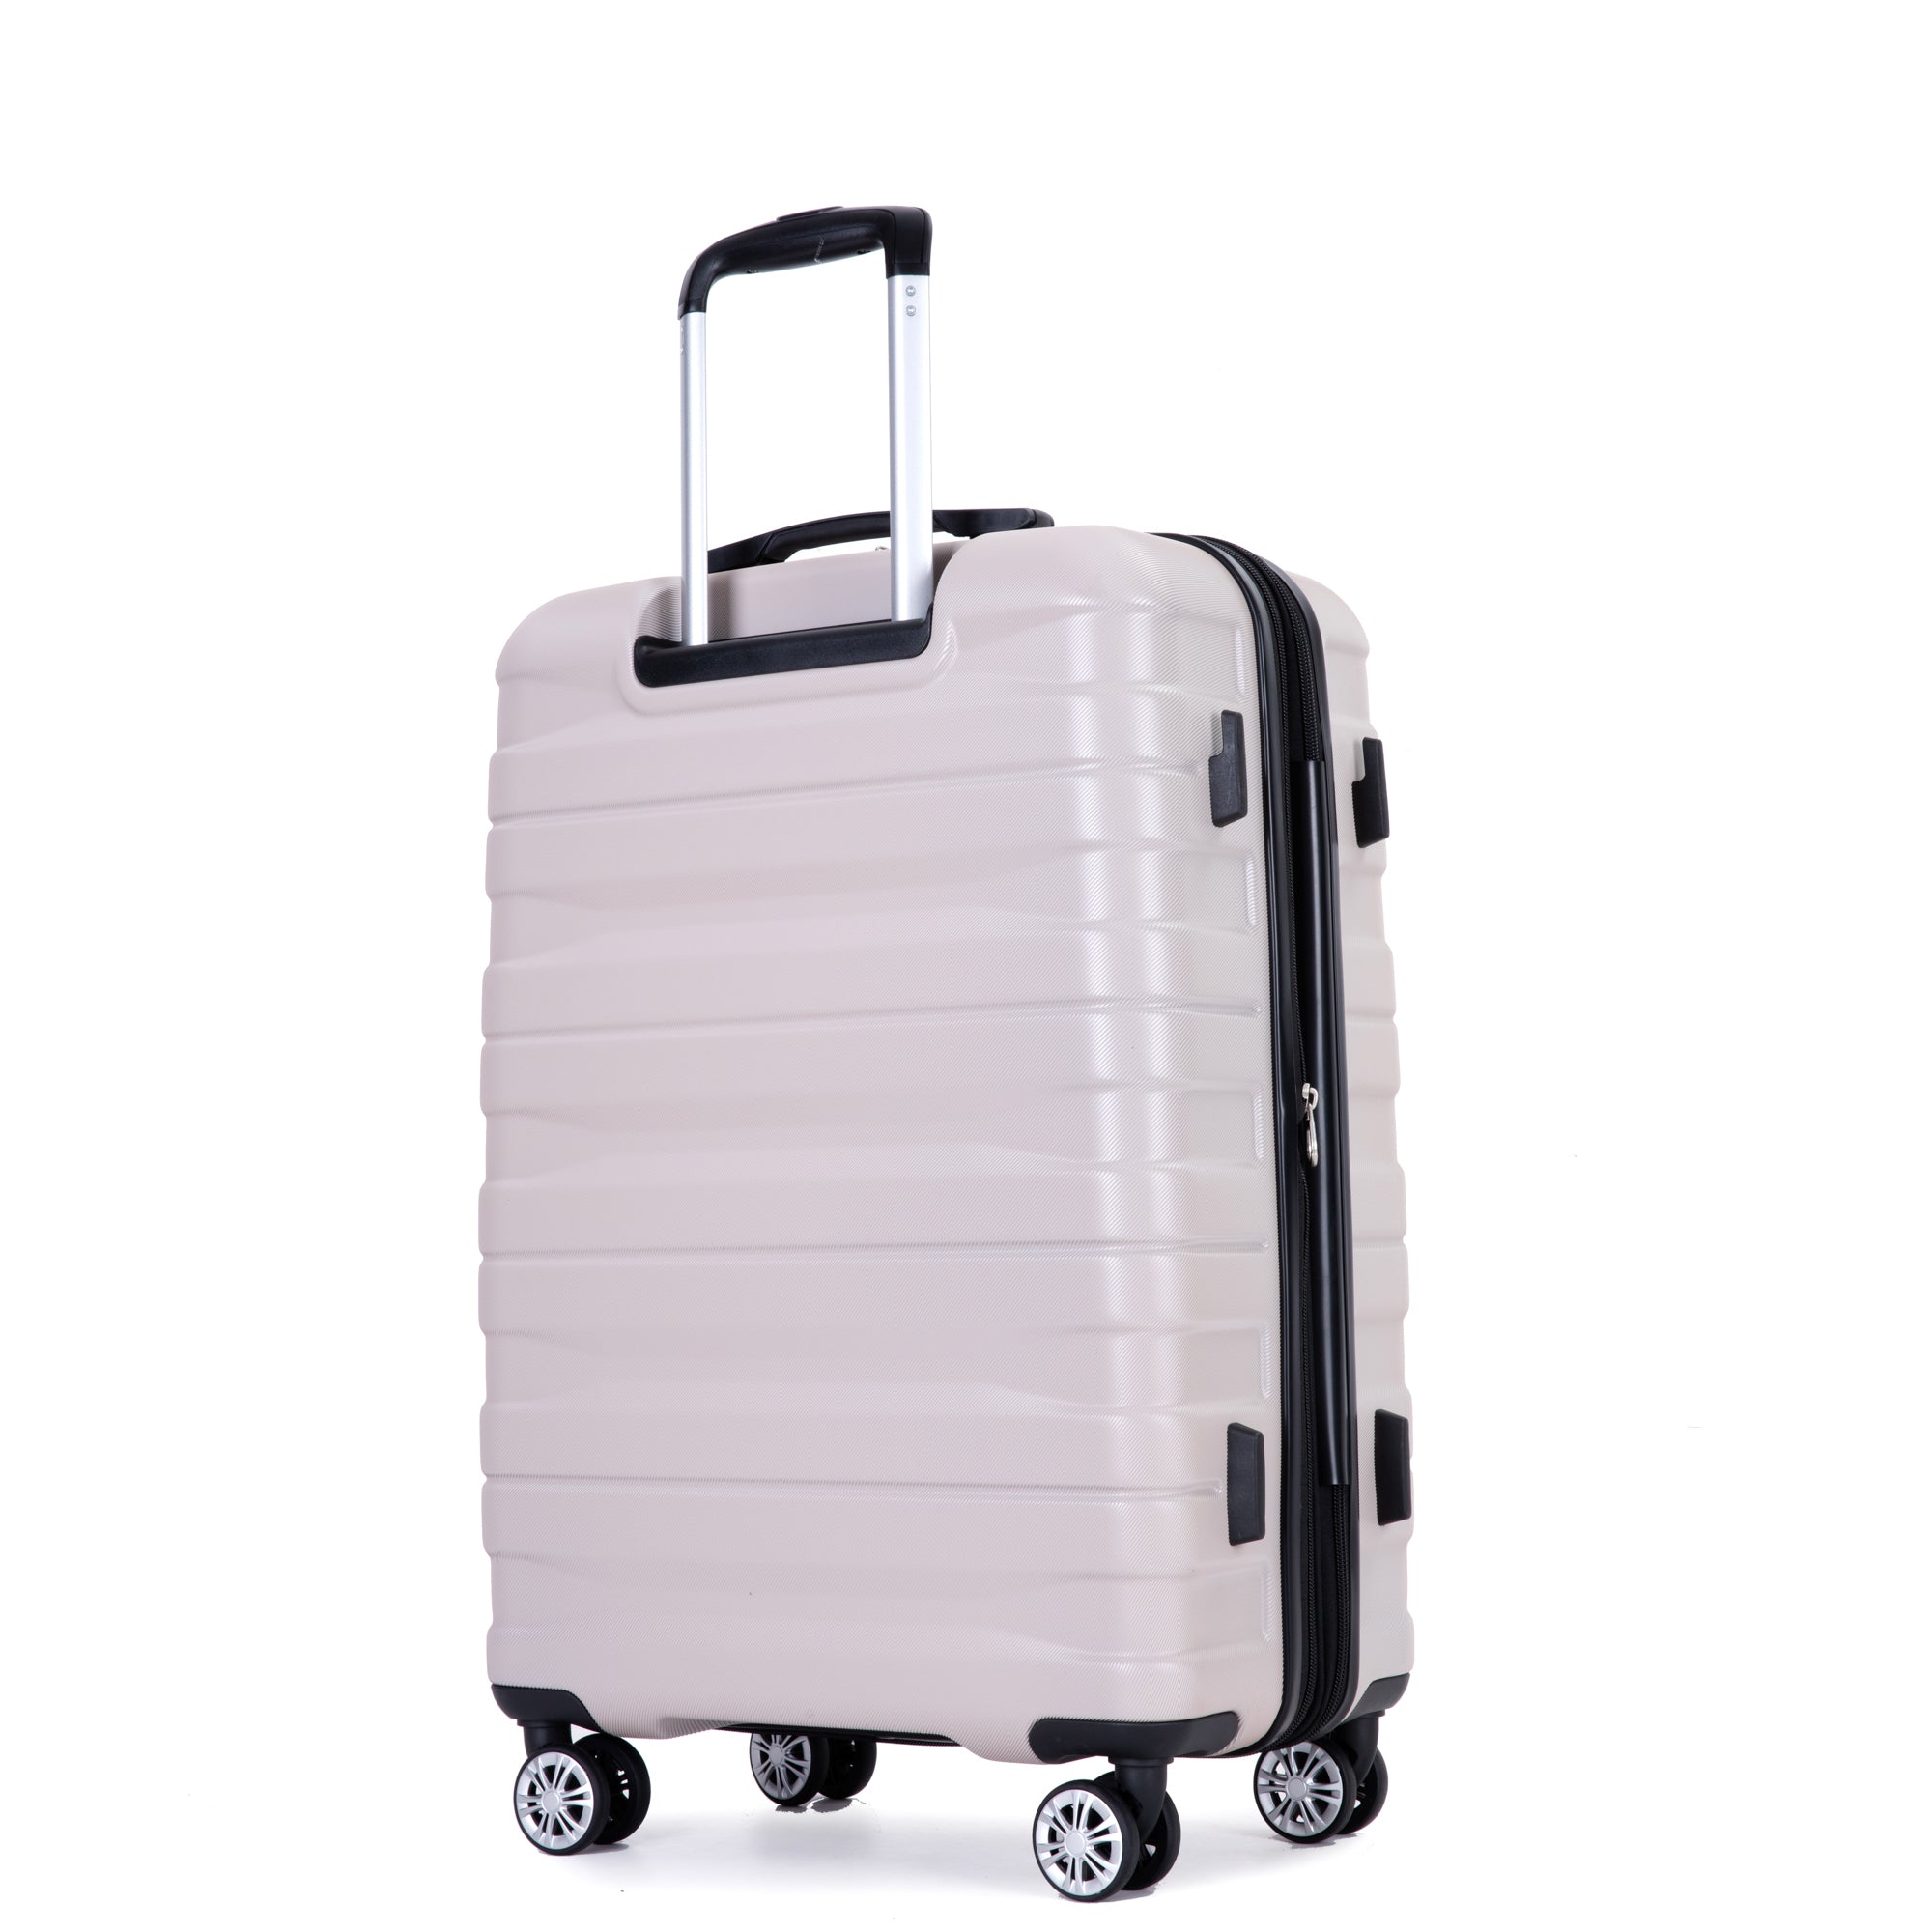 3 Piece Luggage Sets PC Lightweight & Durable sand-pc